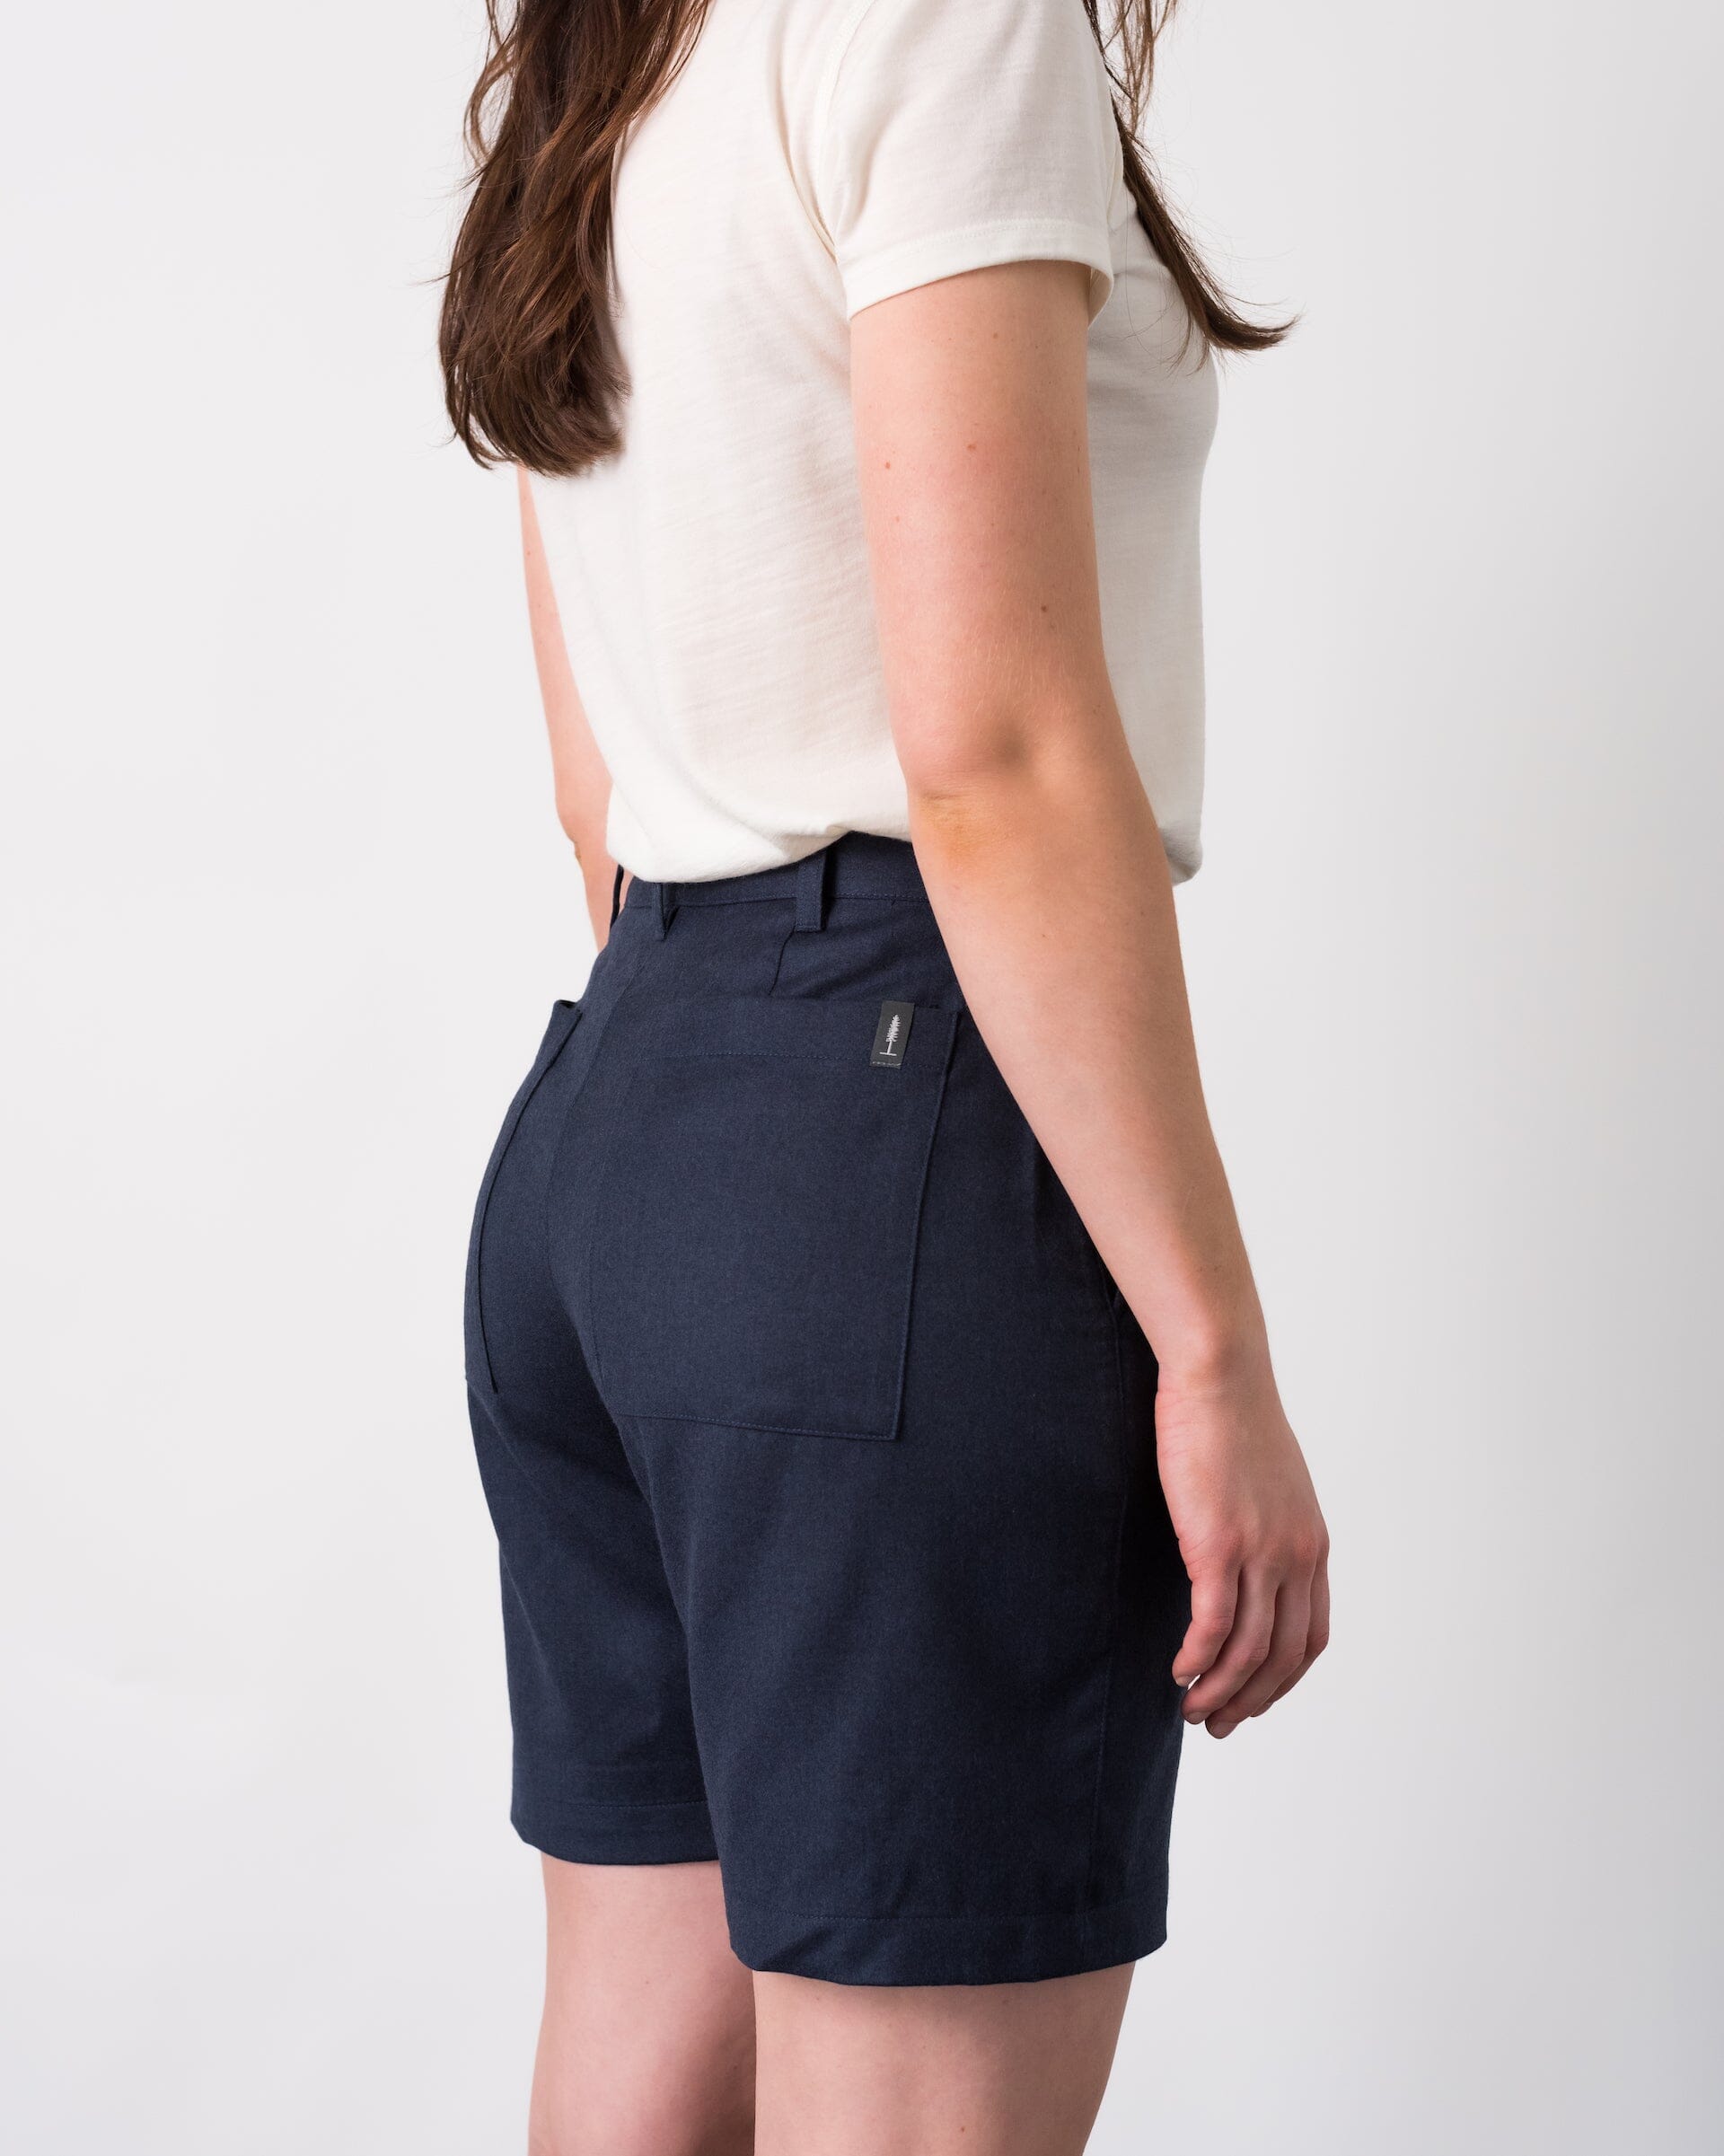 The Womens Light Wool Short in Heather Navy - Full Body 2 #color_heather navy